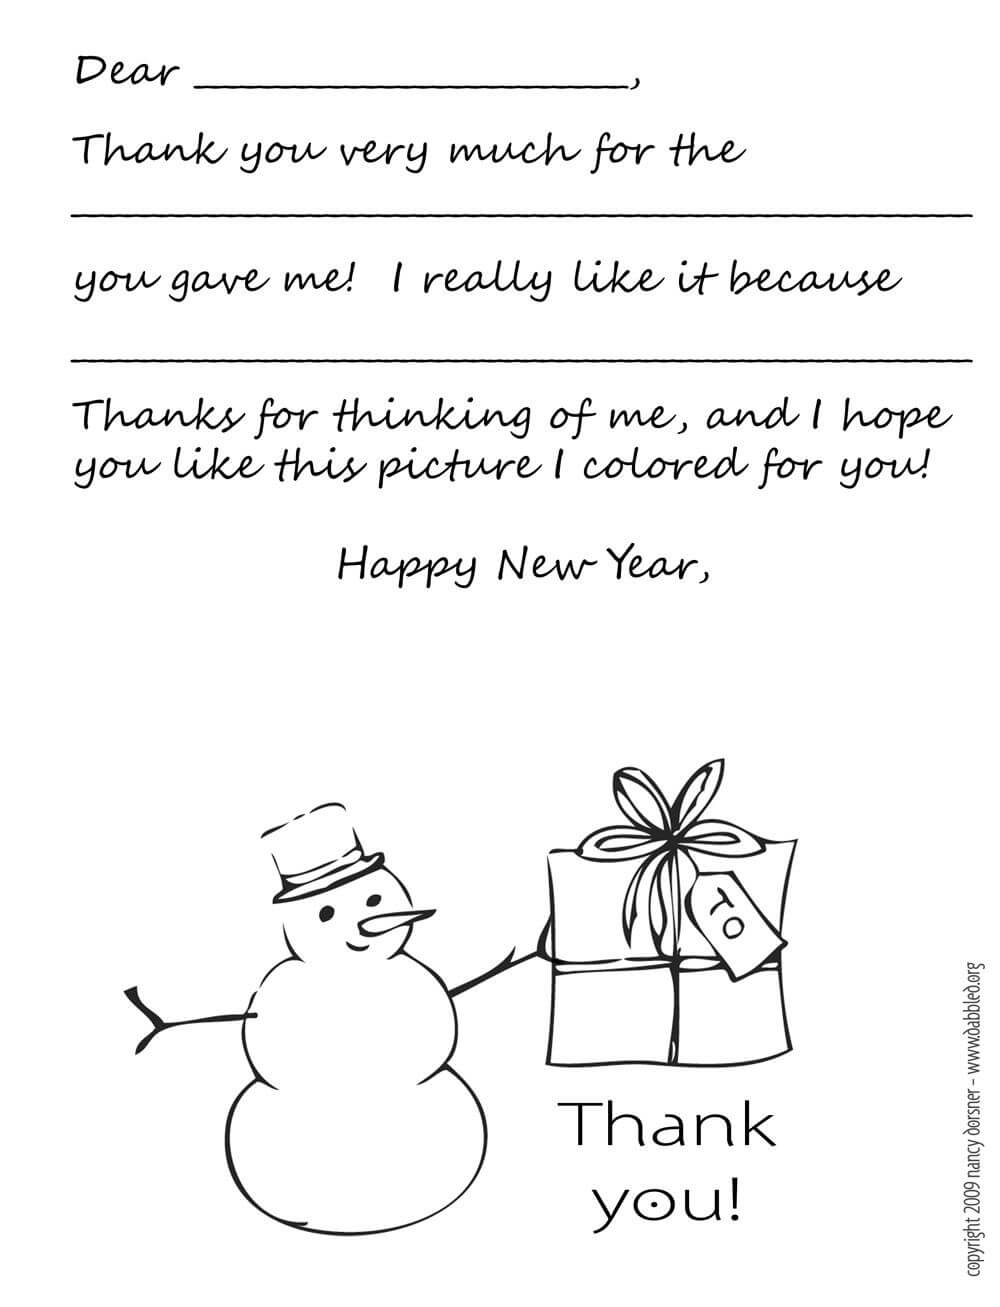 Download: Printable Holiday Thank You Note Template For Kids With Thank You Note Cards Template